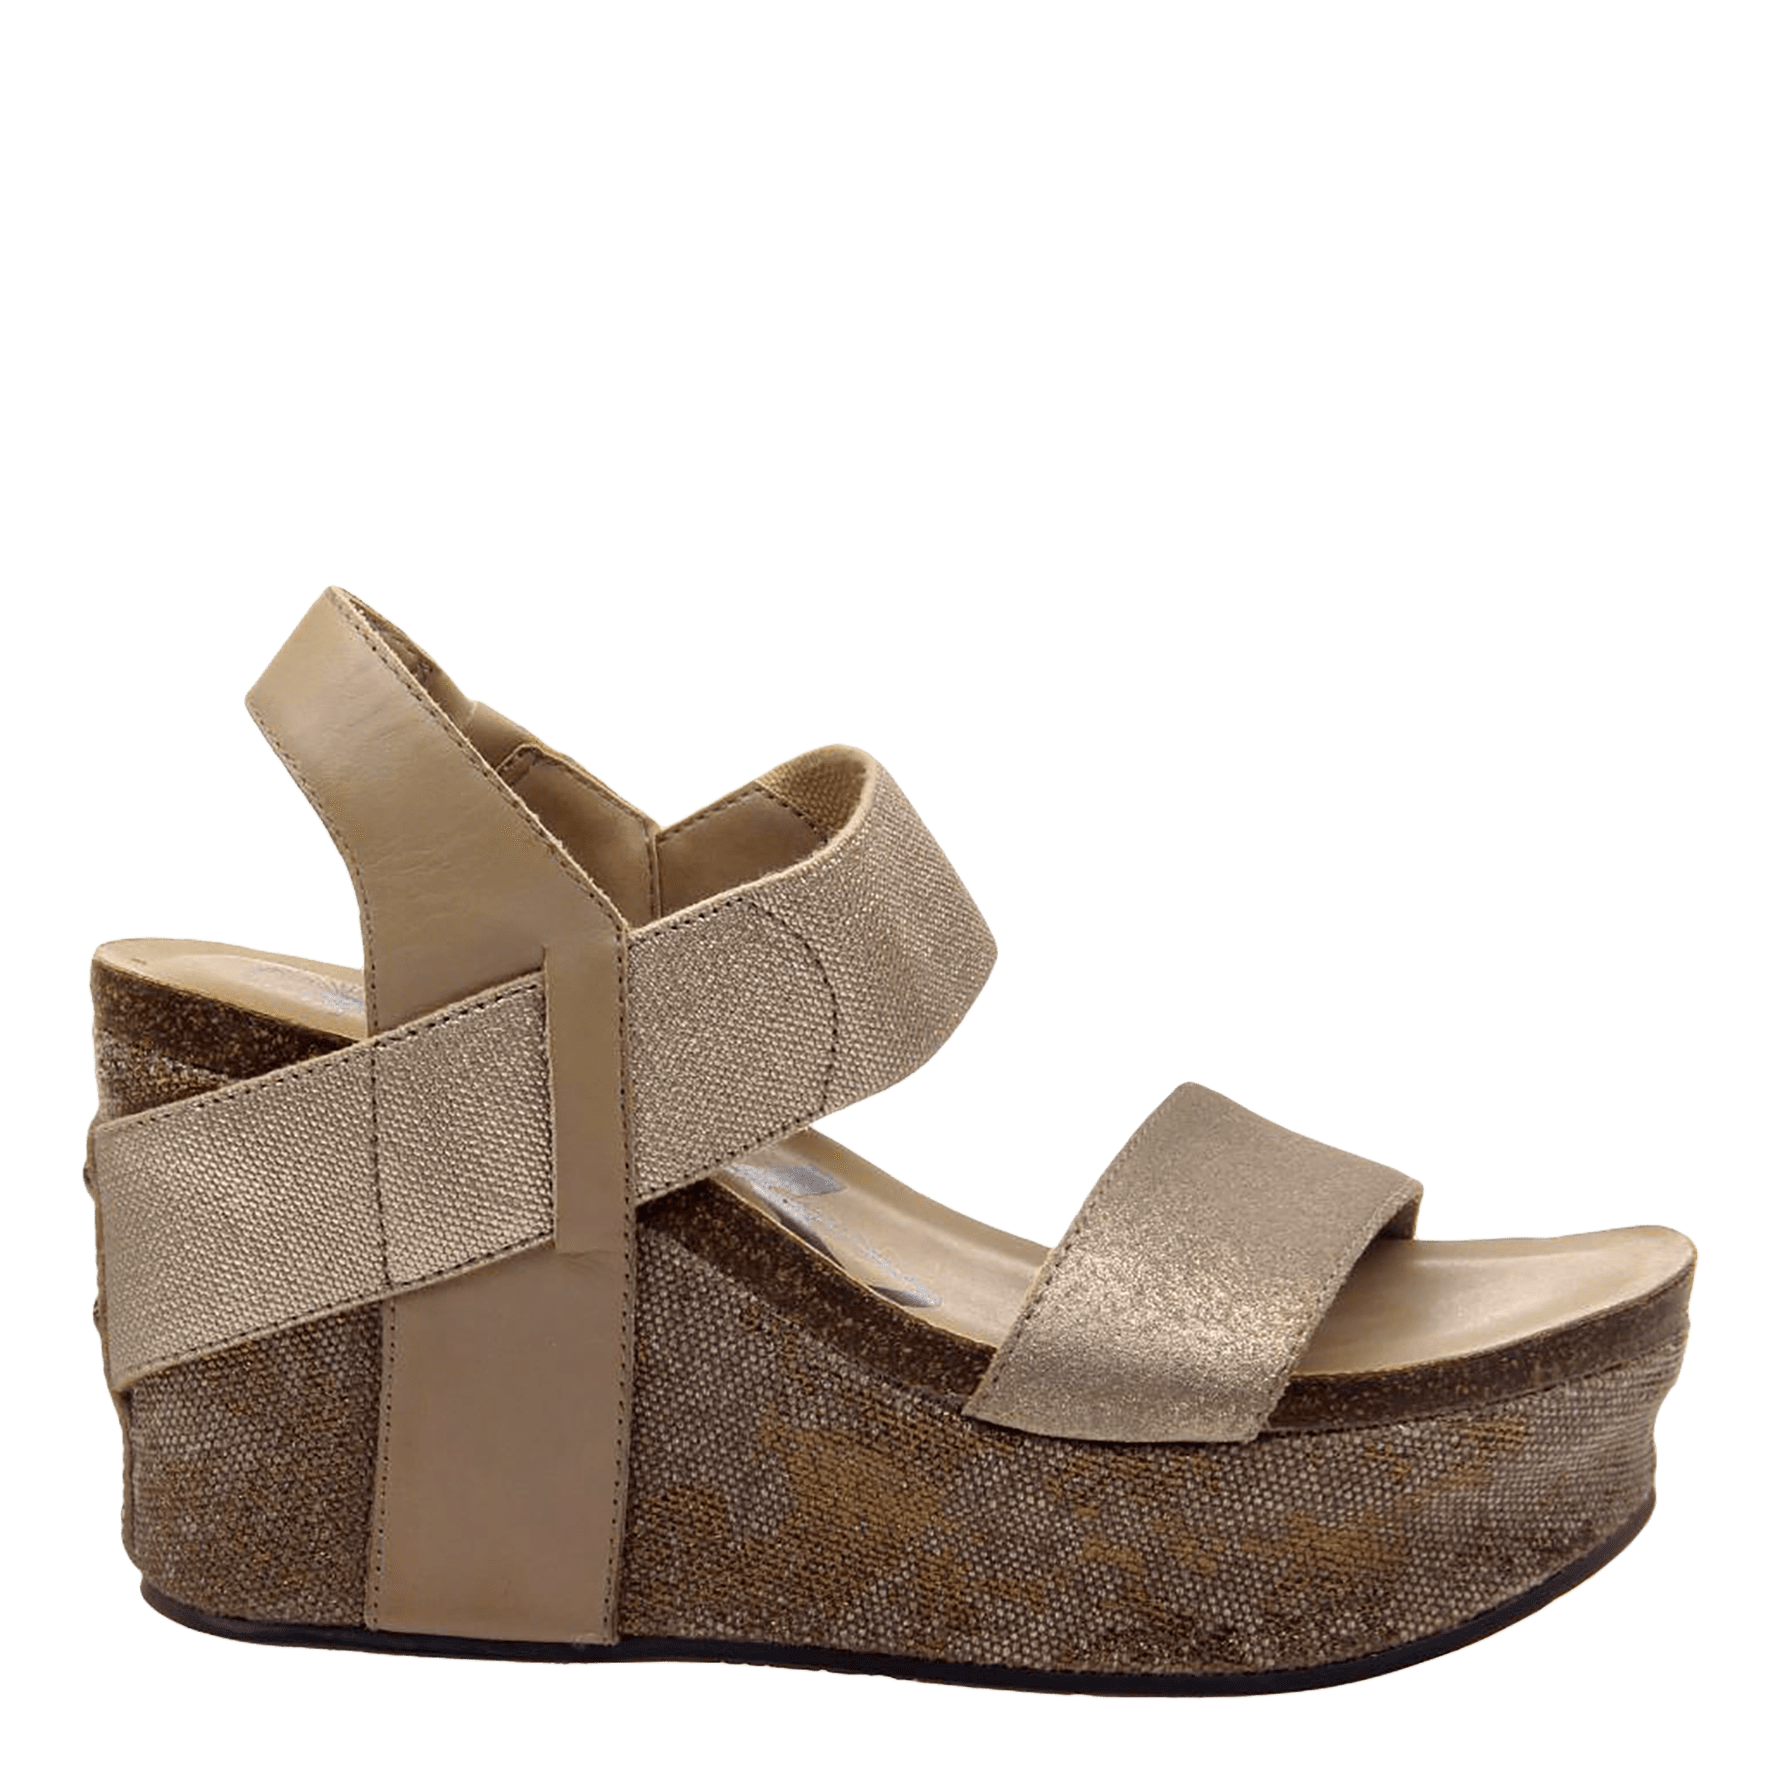 Bushnell in Mid Taupe Wedge Sandals 